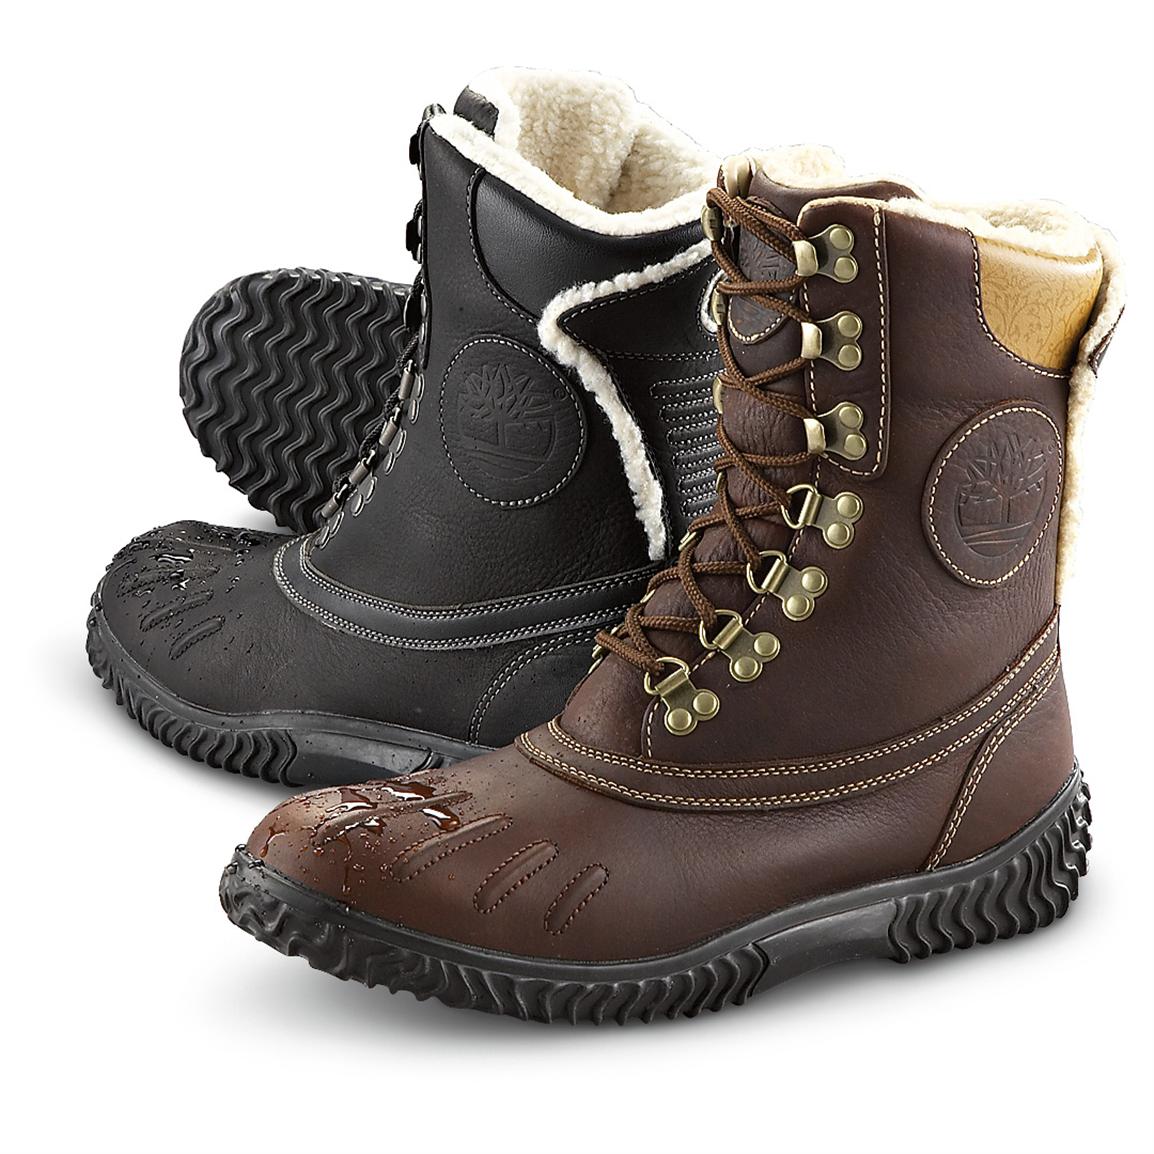 Men's Timberland® Waterproof Pak Boots 146091, Winter & Snow Boots at Sportsman's Guide